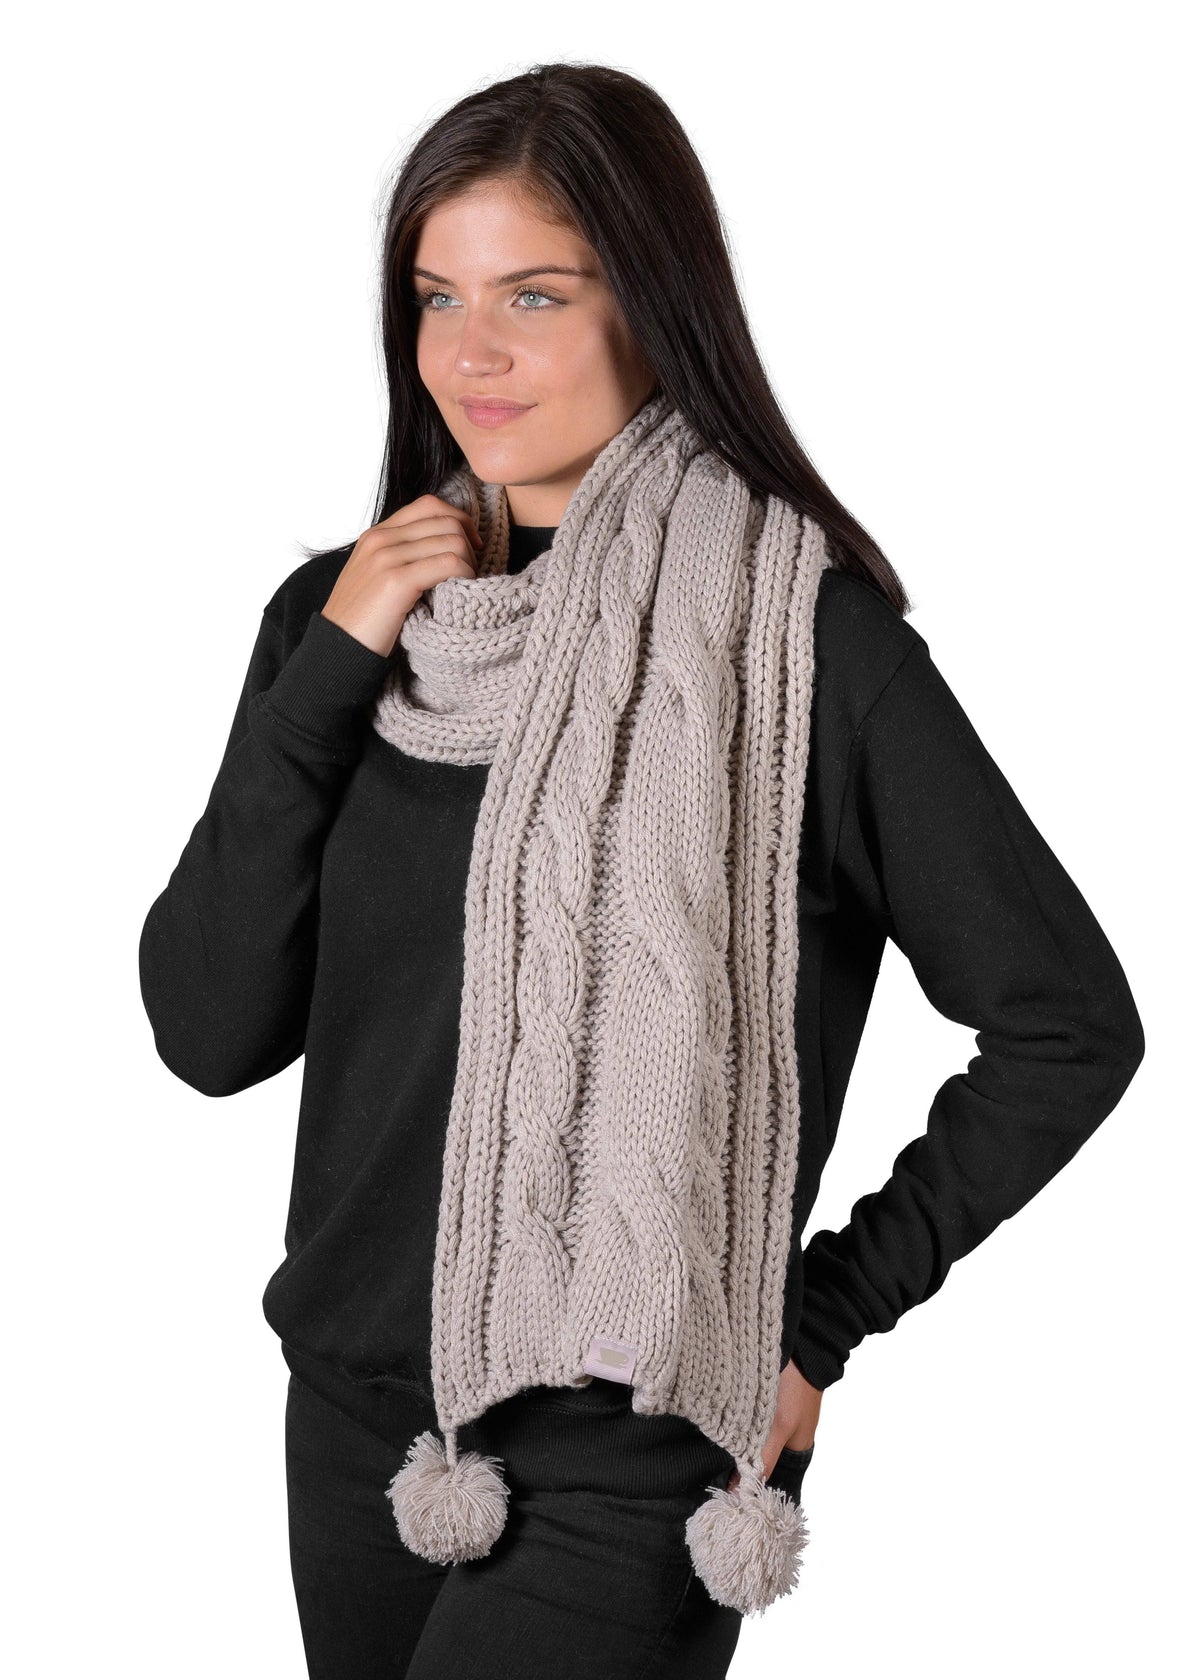 Textured Cable Knit Pom Pom Scarf - Silver Cloud - LATTELOVE Co.